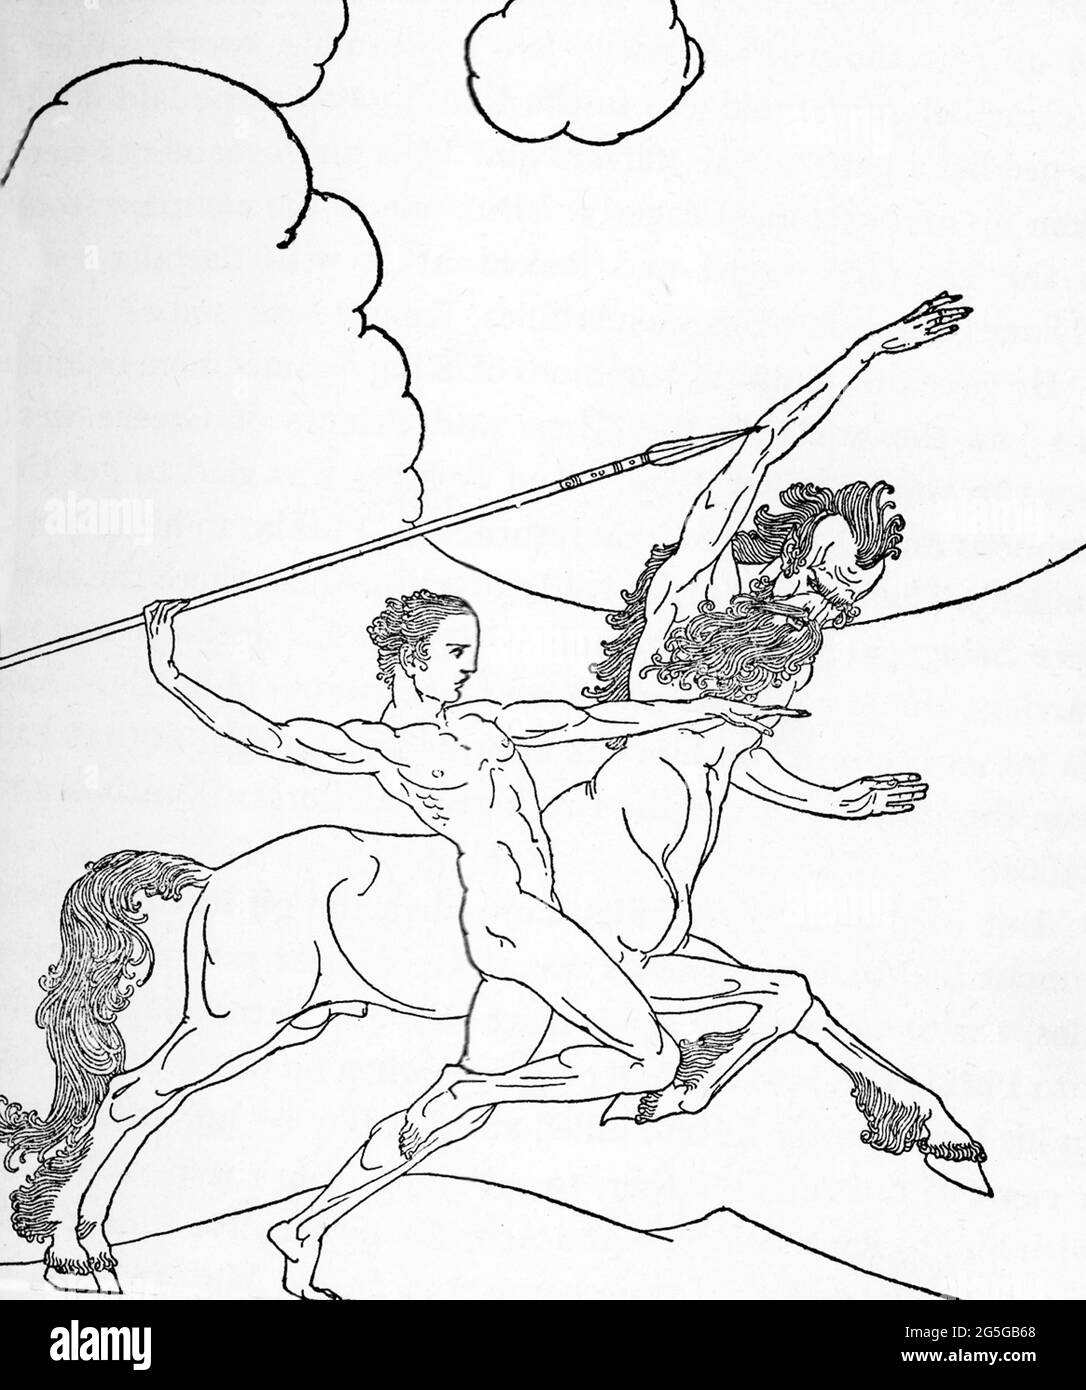 This 1918 image shows Chiron (Cheiron) the Centaur giving Peleus the great spear, a scene from Homer’s Odyssey. Chiron was a guest at the marriage of Peleus and Thetis. Chiron presented Peleus with a spear made from ash, which had been polished by Athena and given its metal point by Hephaestus. This spear would later be owned by the son of Peleus, Achilles, the Greek hero of the Trojan War. Stock Photo